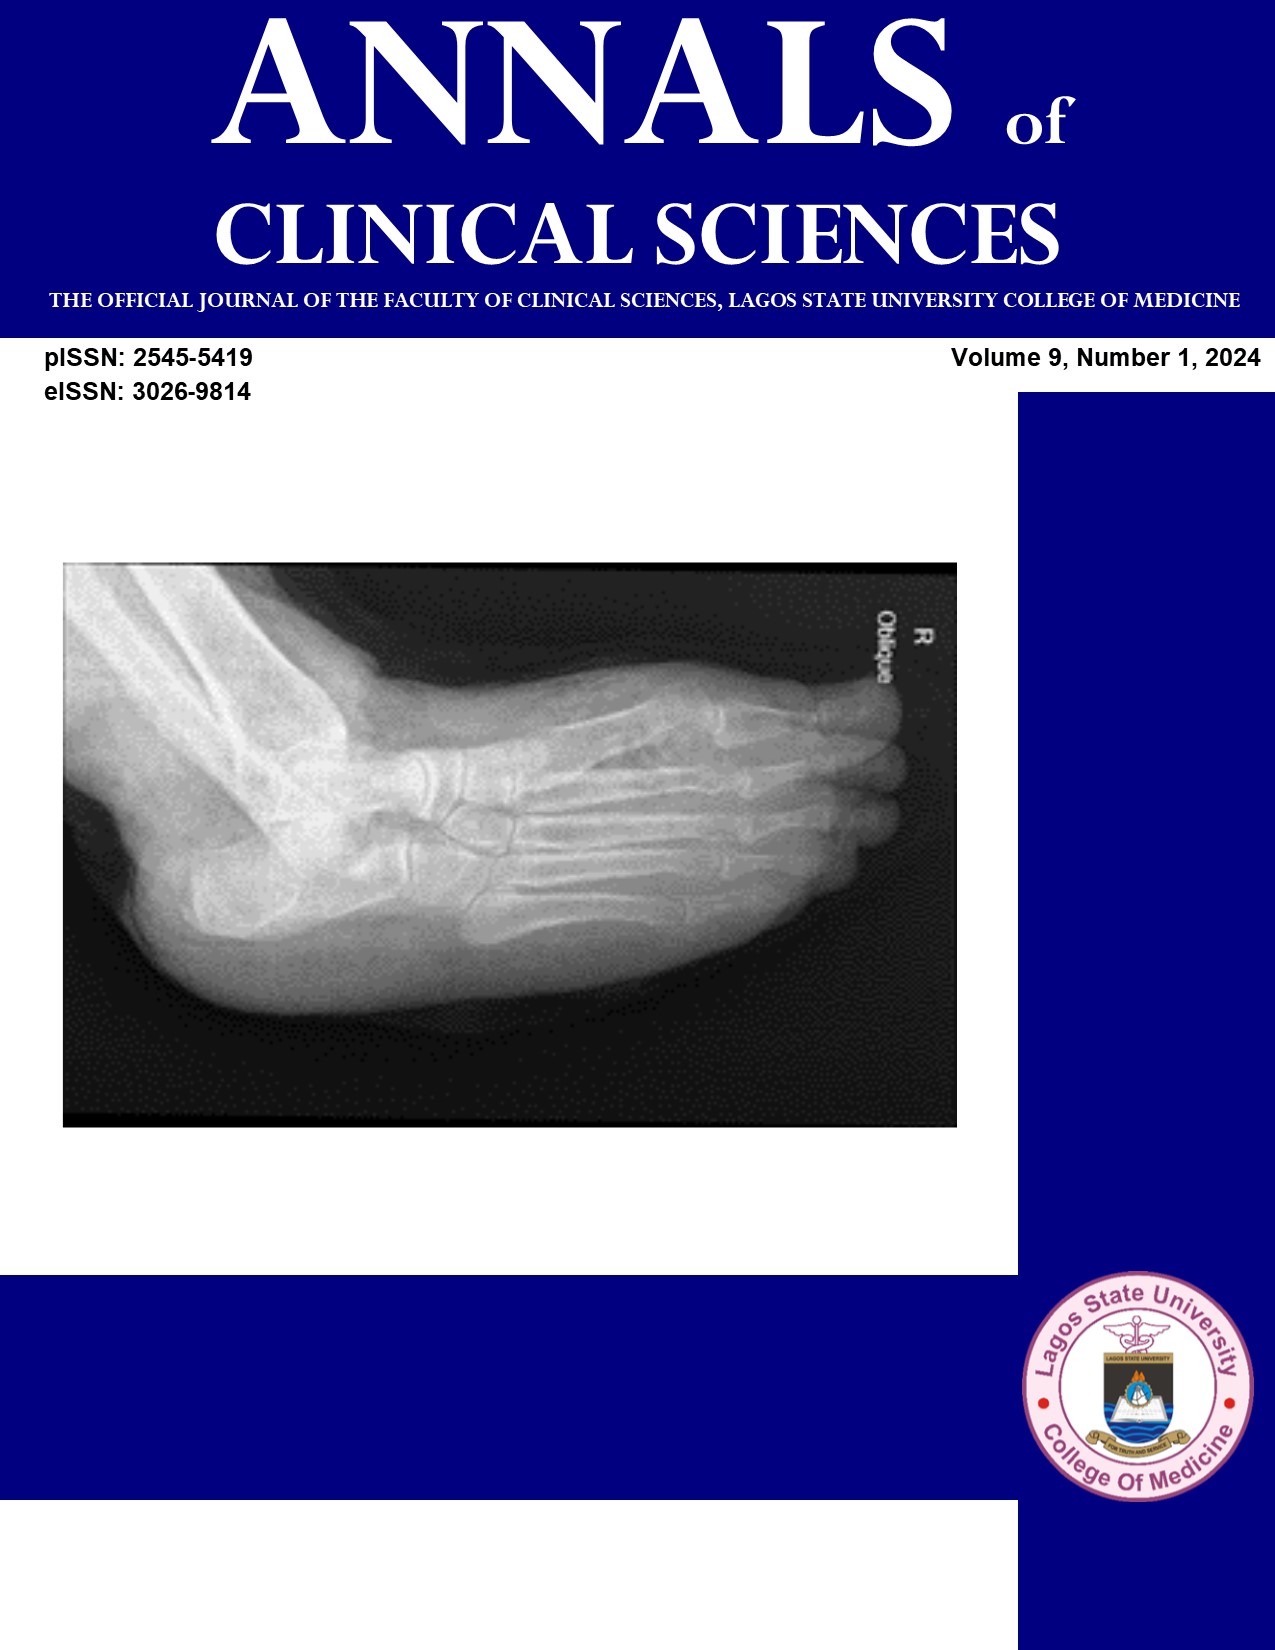 					View Vol. 9 No. 1 (2024): Annals of Clinical Sciences
				